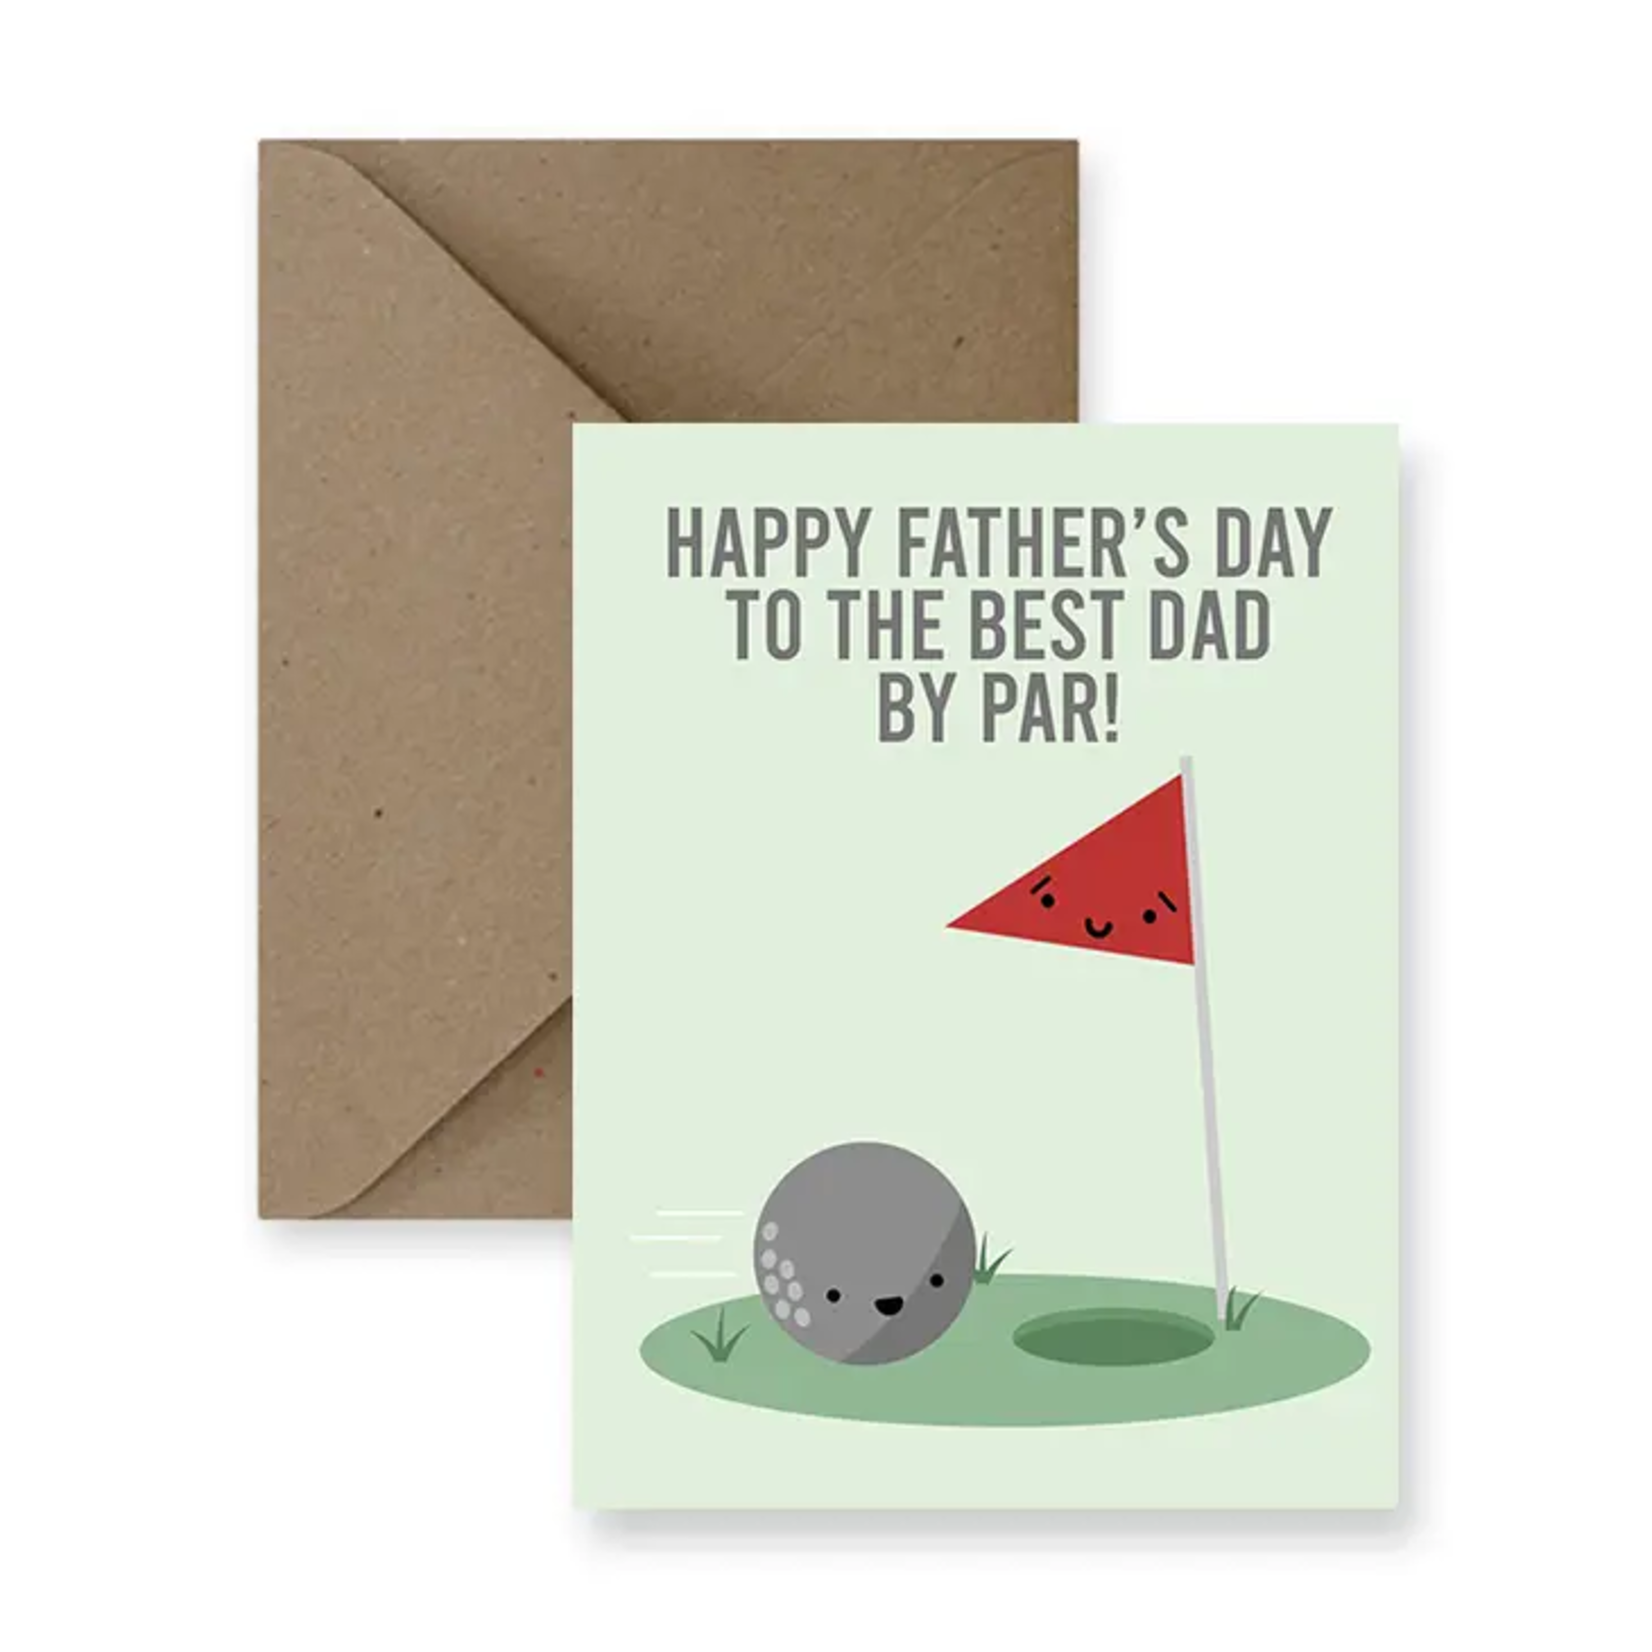 Best Dad by Par! Father's Day Card